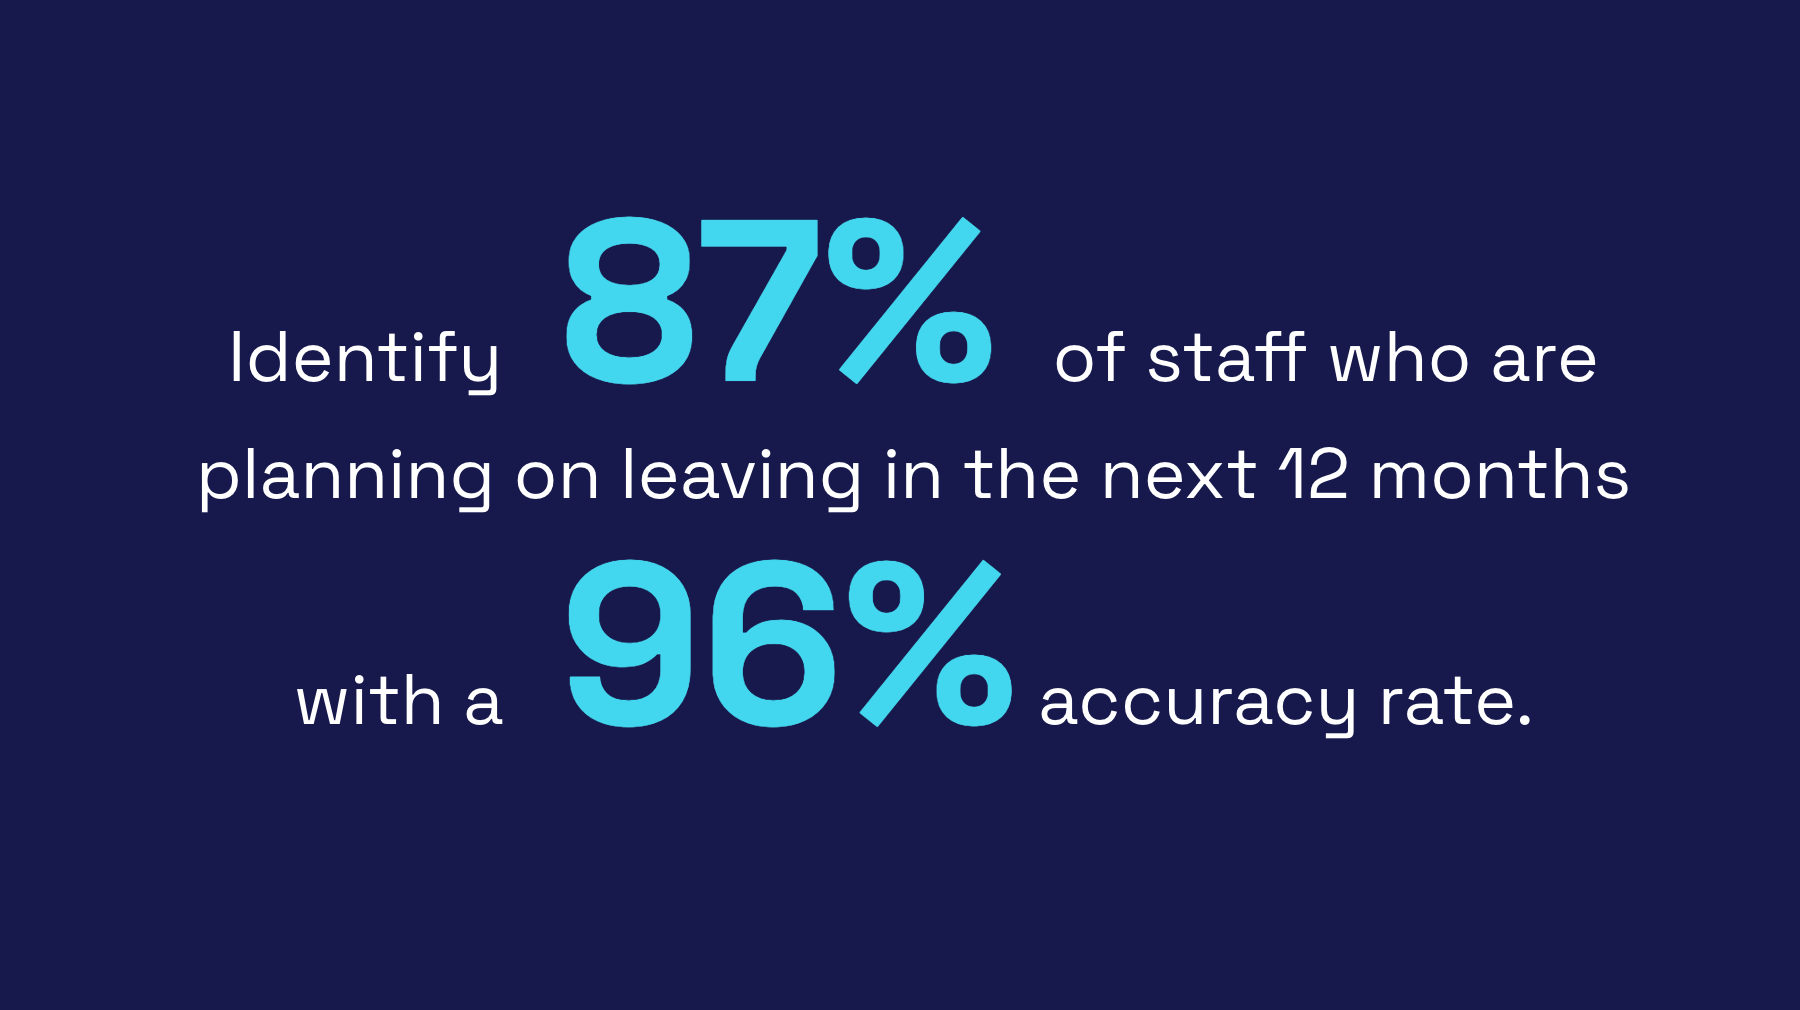 Identify 87% of staff who are planning on leaving in the next 12 months with a 96% accuracy rate.